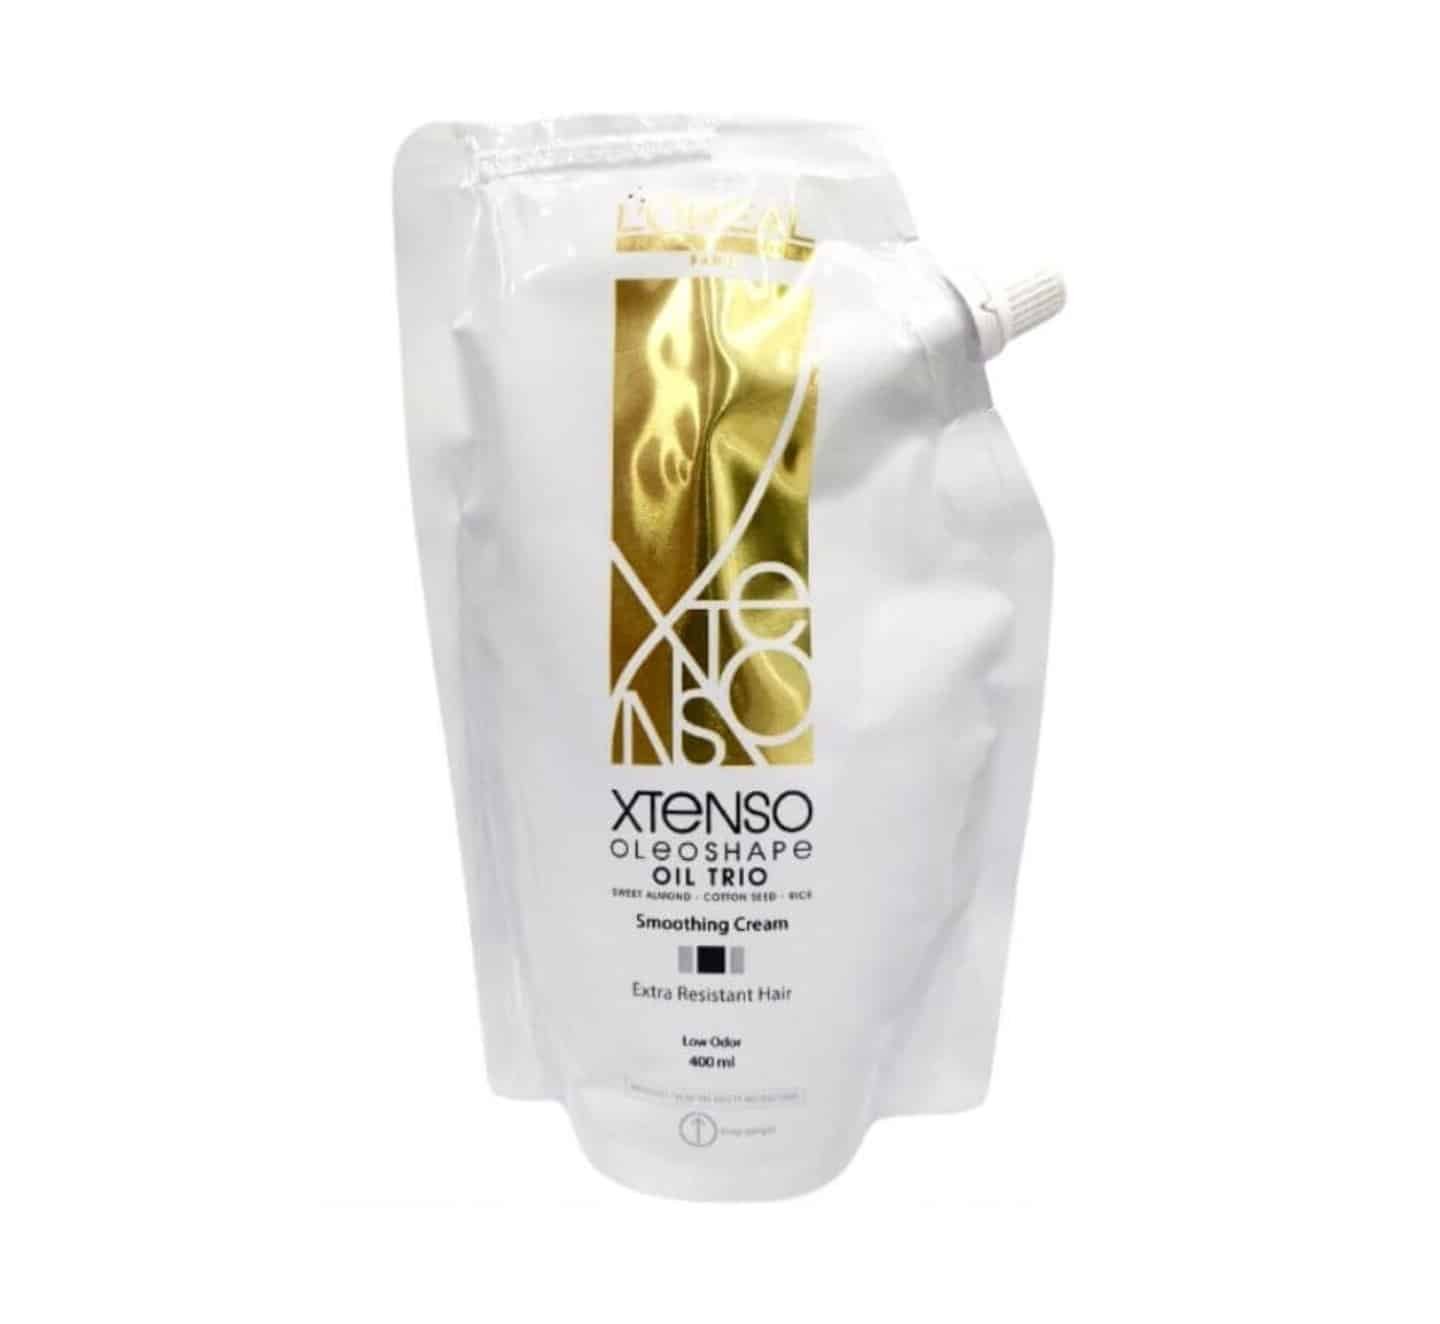 Loreal Smooth Revival Hair Spa Shampoo And Conditioner